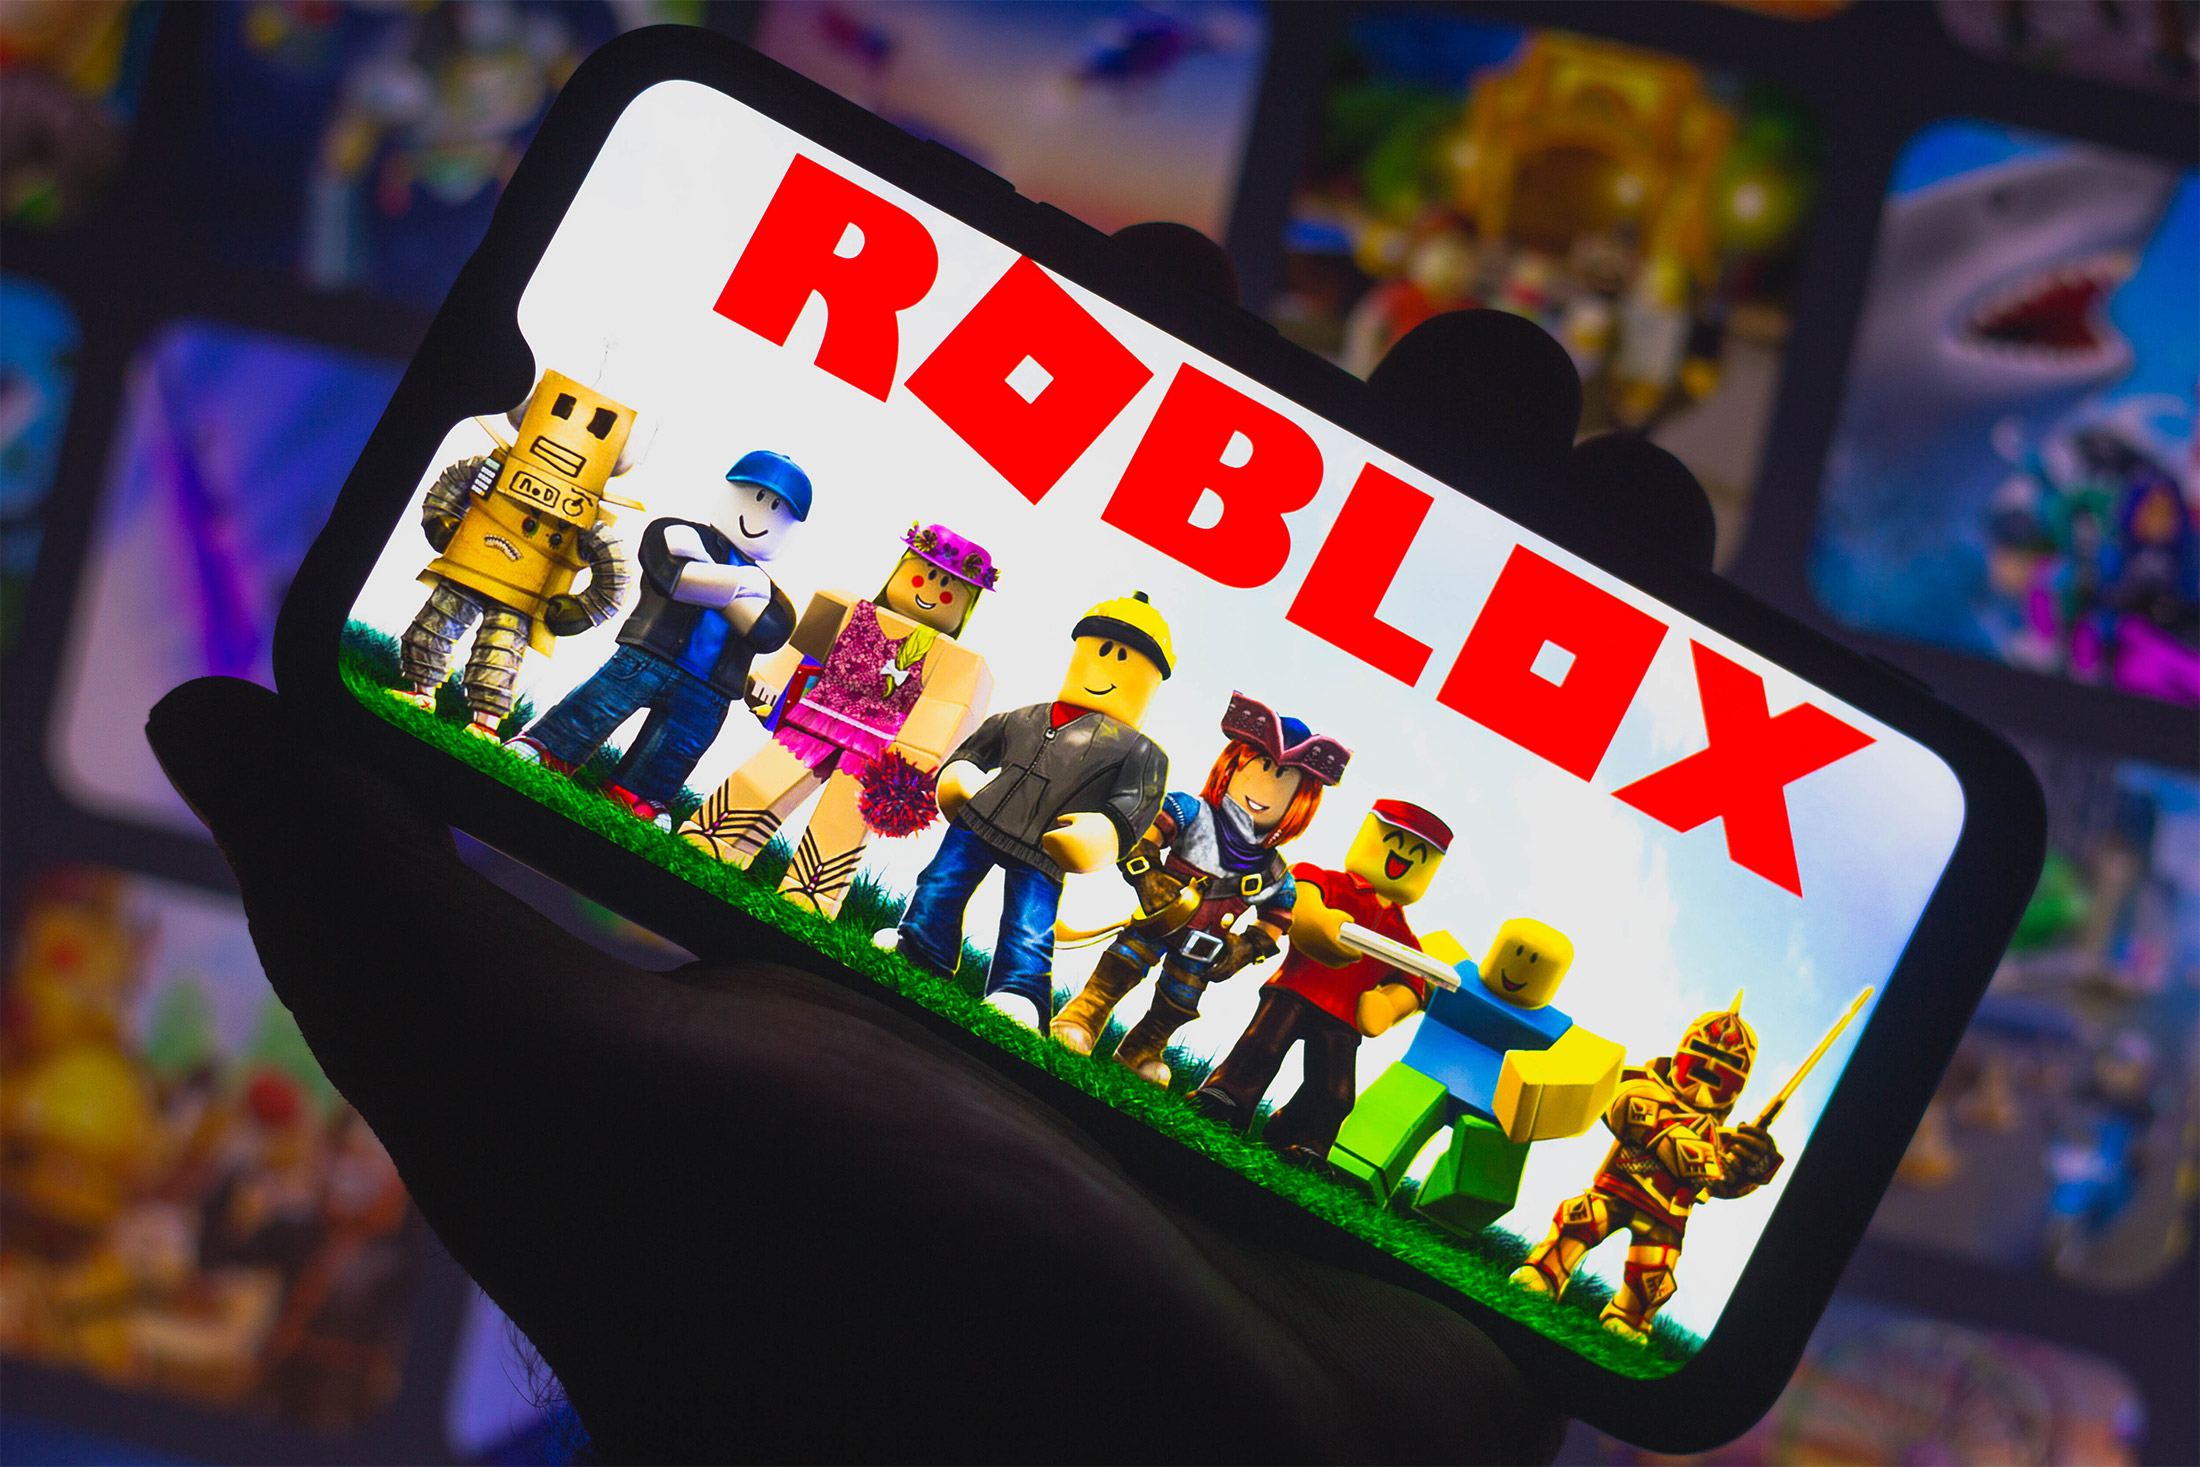 Roblox Alleges Hong Kong Toy Company Ripped Off Avatars to Sell Dolls